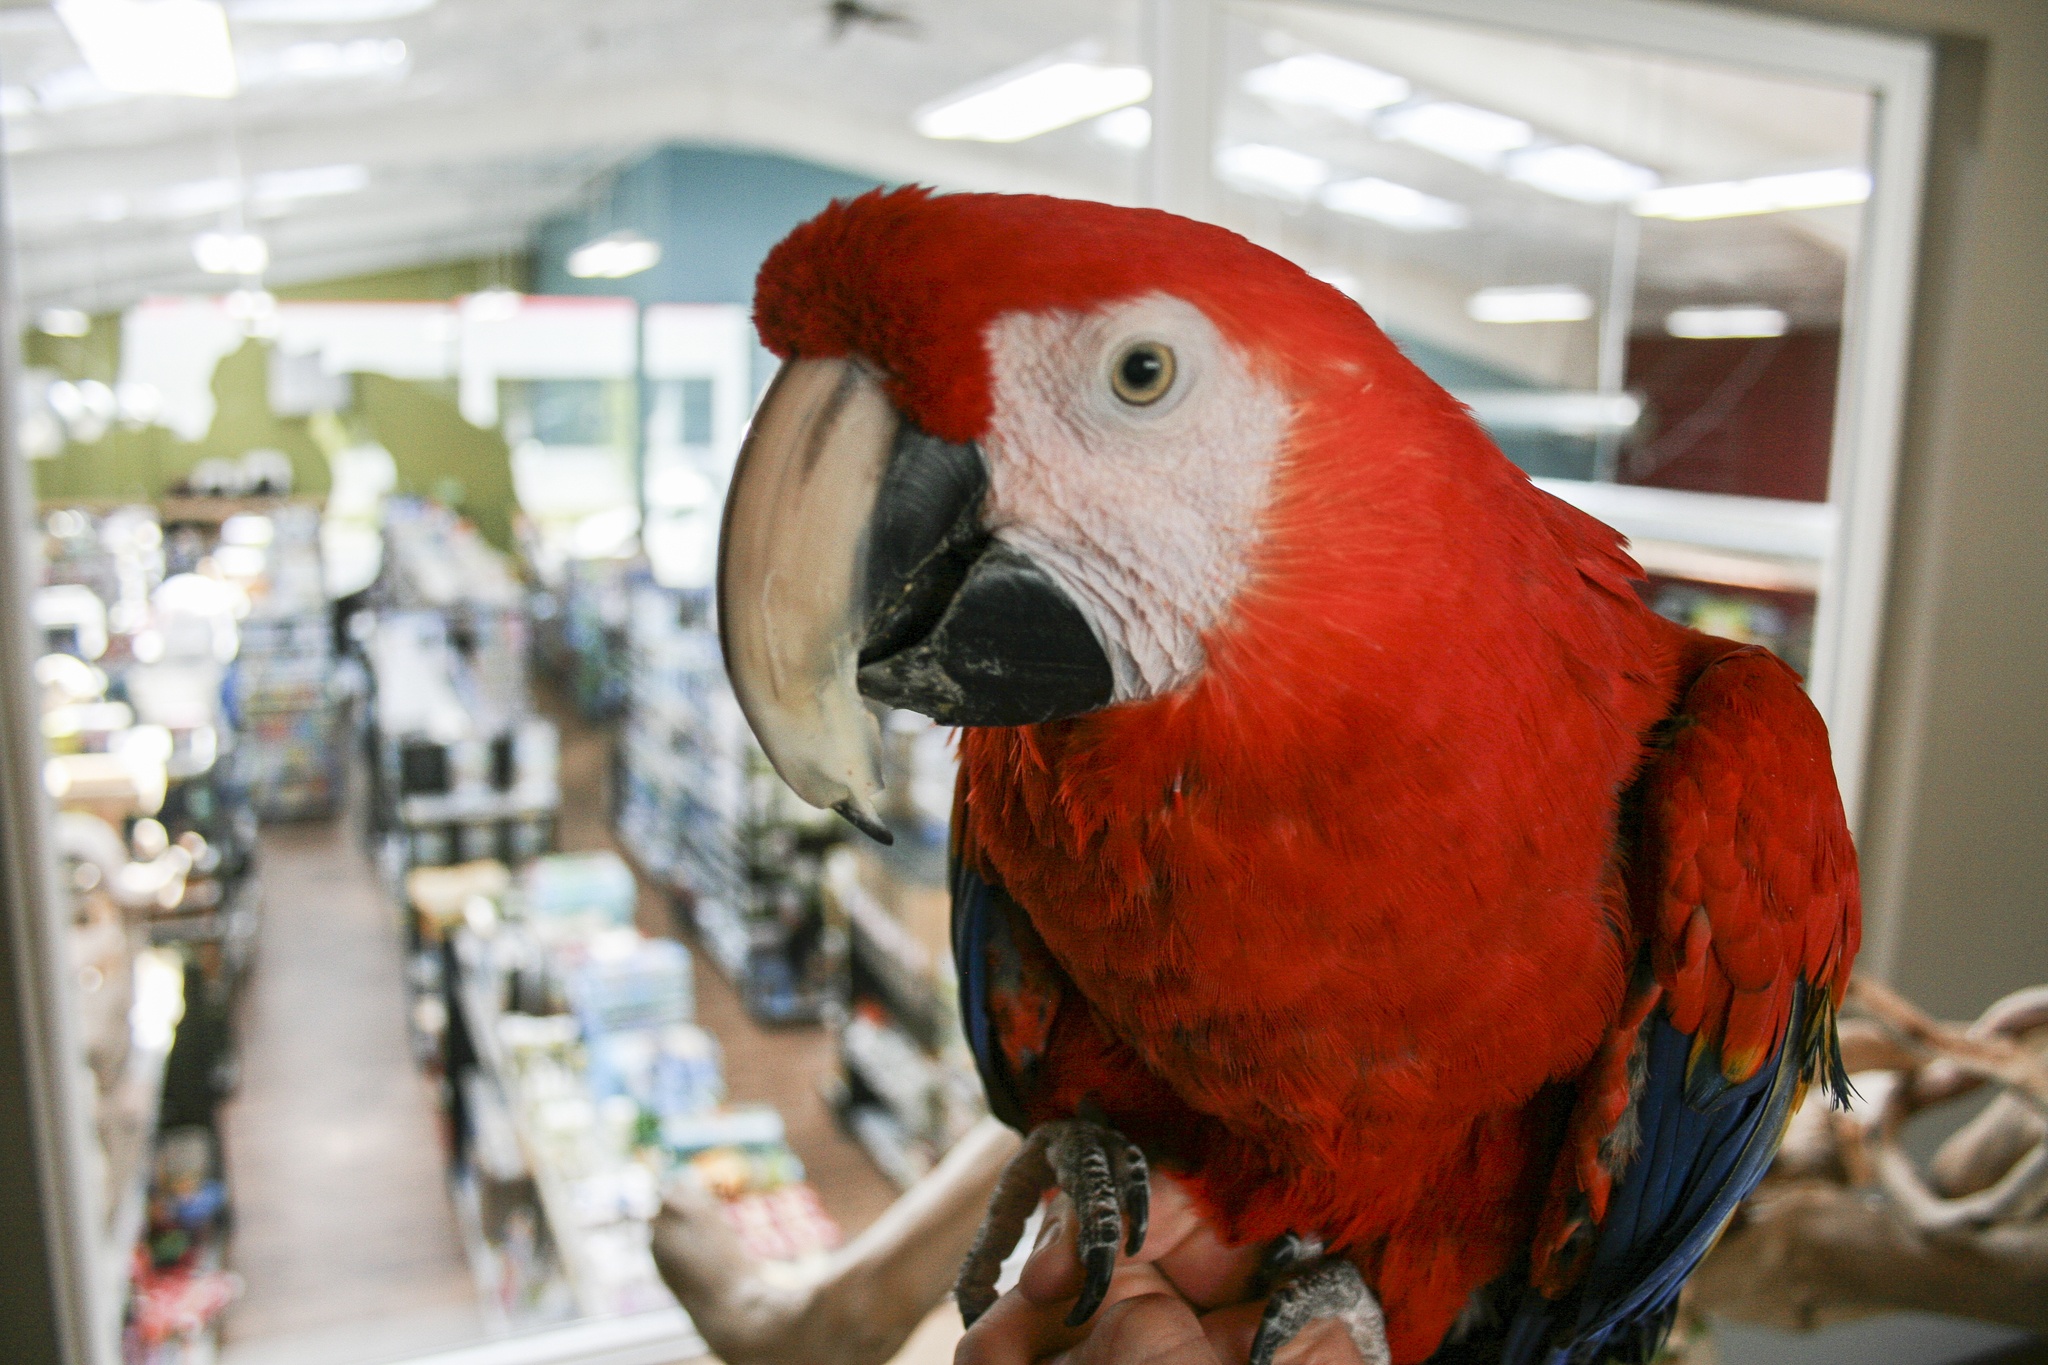 Tiki the macaw has been a staple at Dennys Pet World for decades